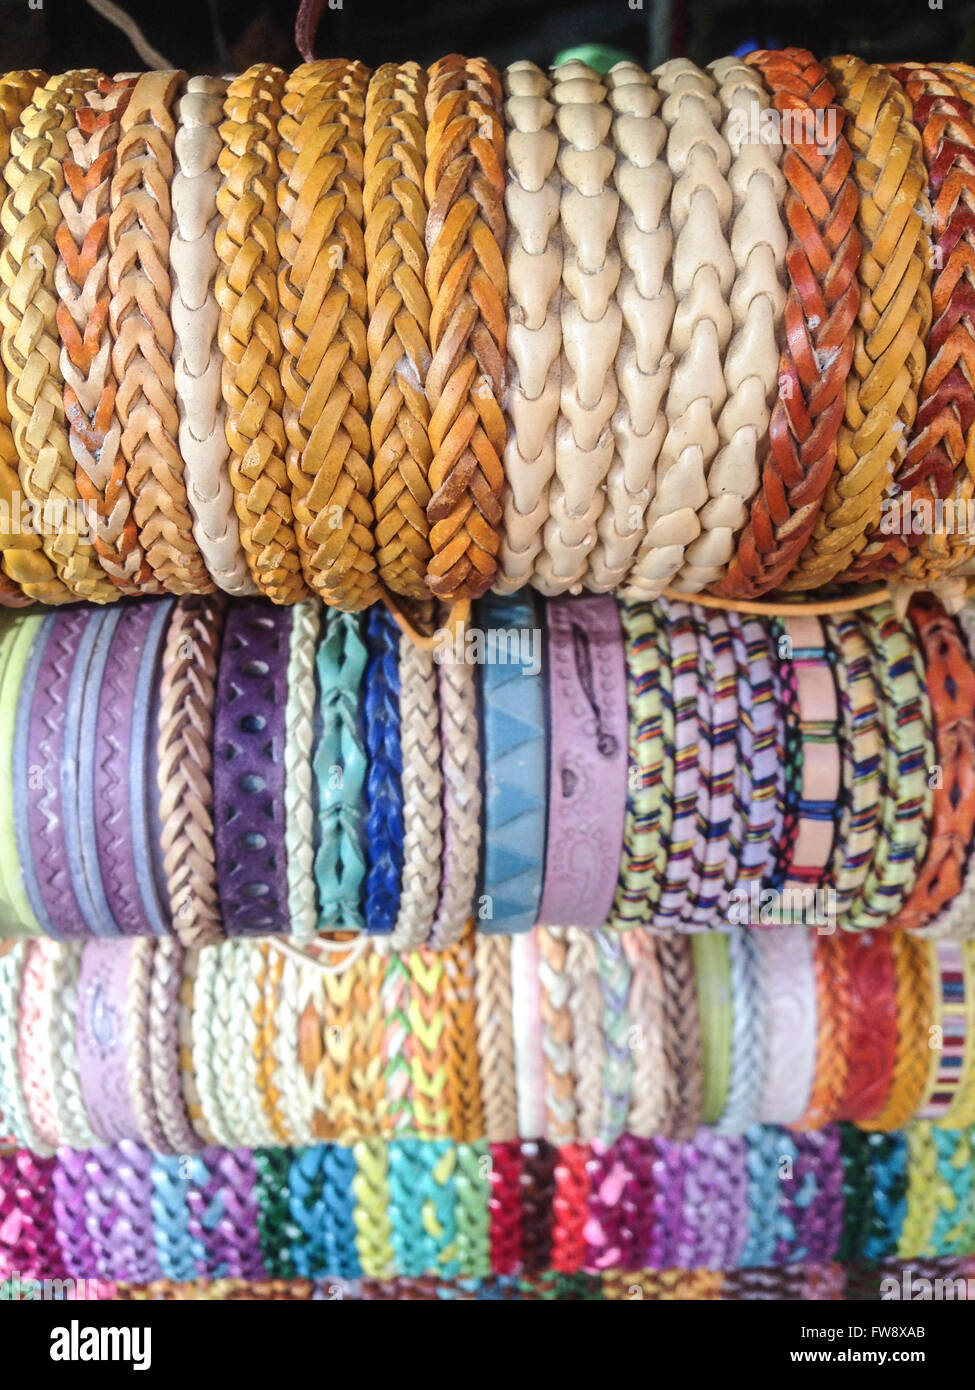 display full of handcrafts colorful bracelets Stock Photo